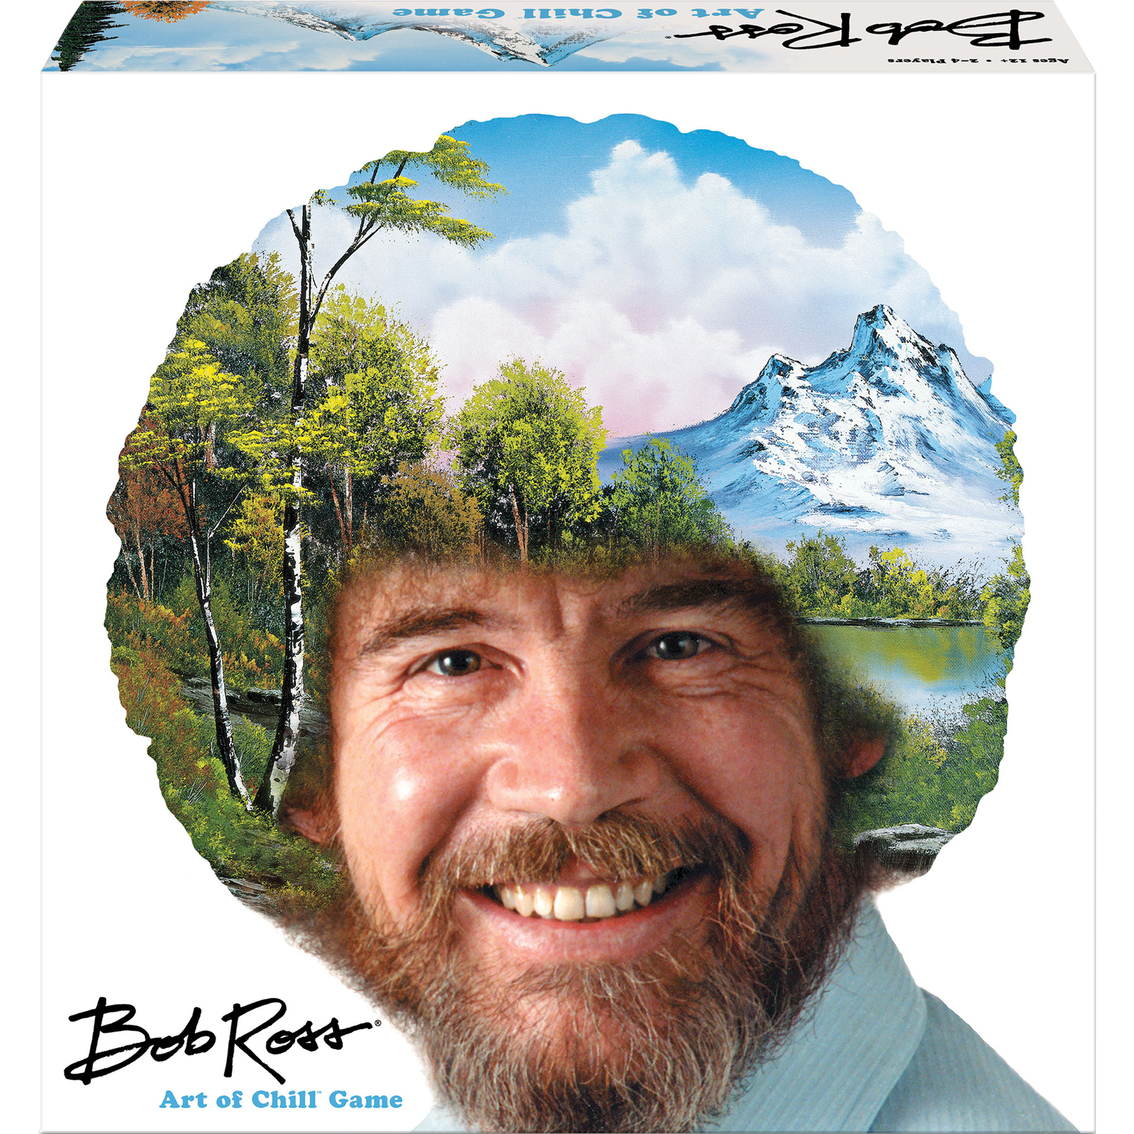 License 2 Play Bob Ross Art of Chill Game - Image 2 of 4